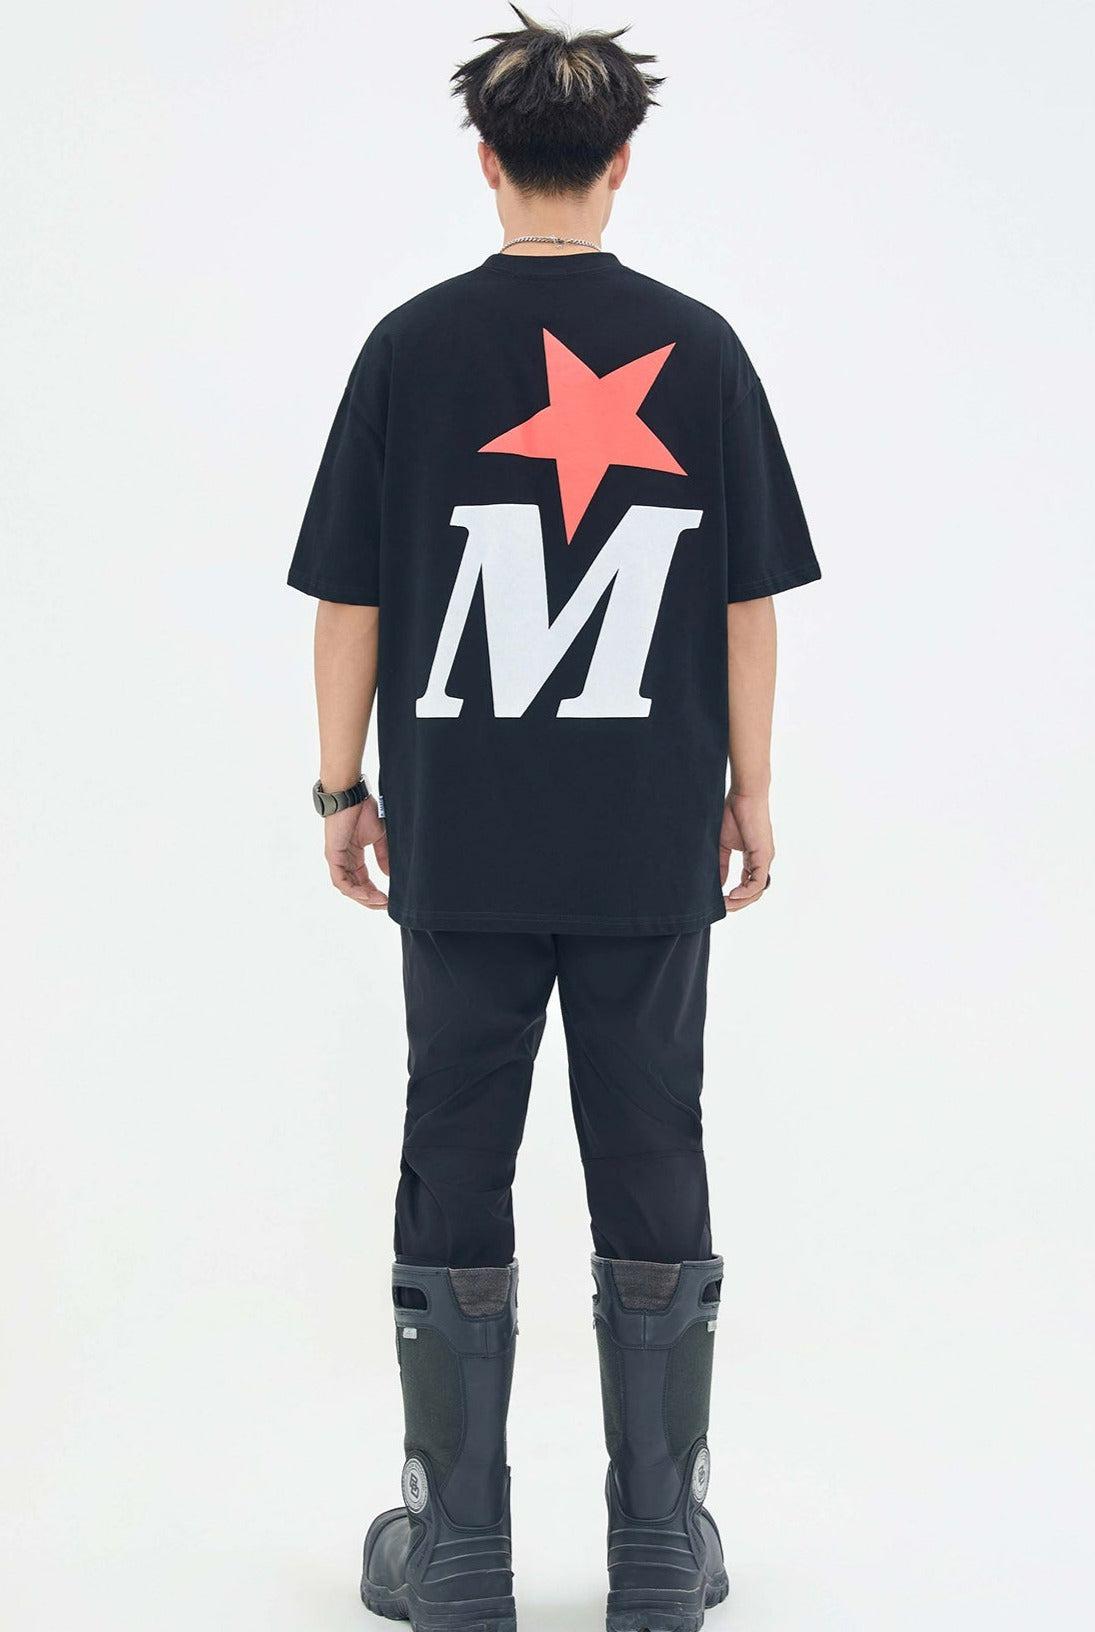 Initial Logo & Star Graphic T-Shirt Korean Street Fashion T-Shirt By Made Extreme Shop Online at OH Vault